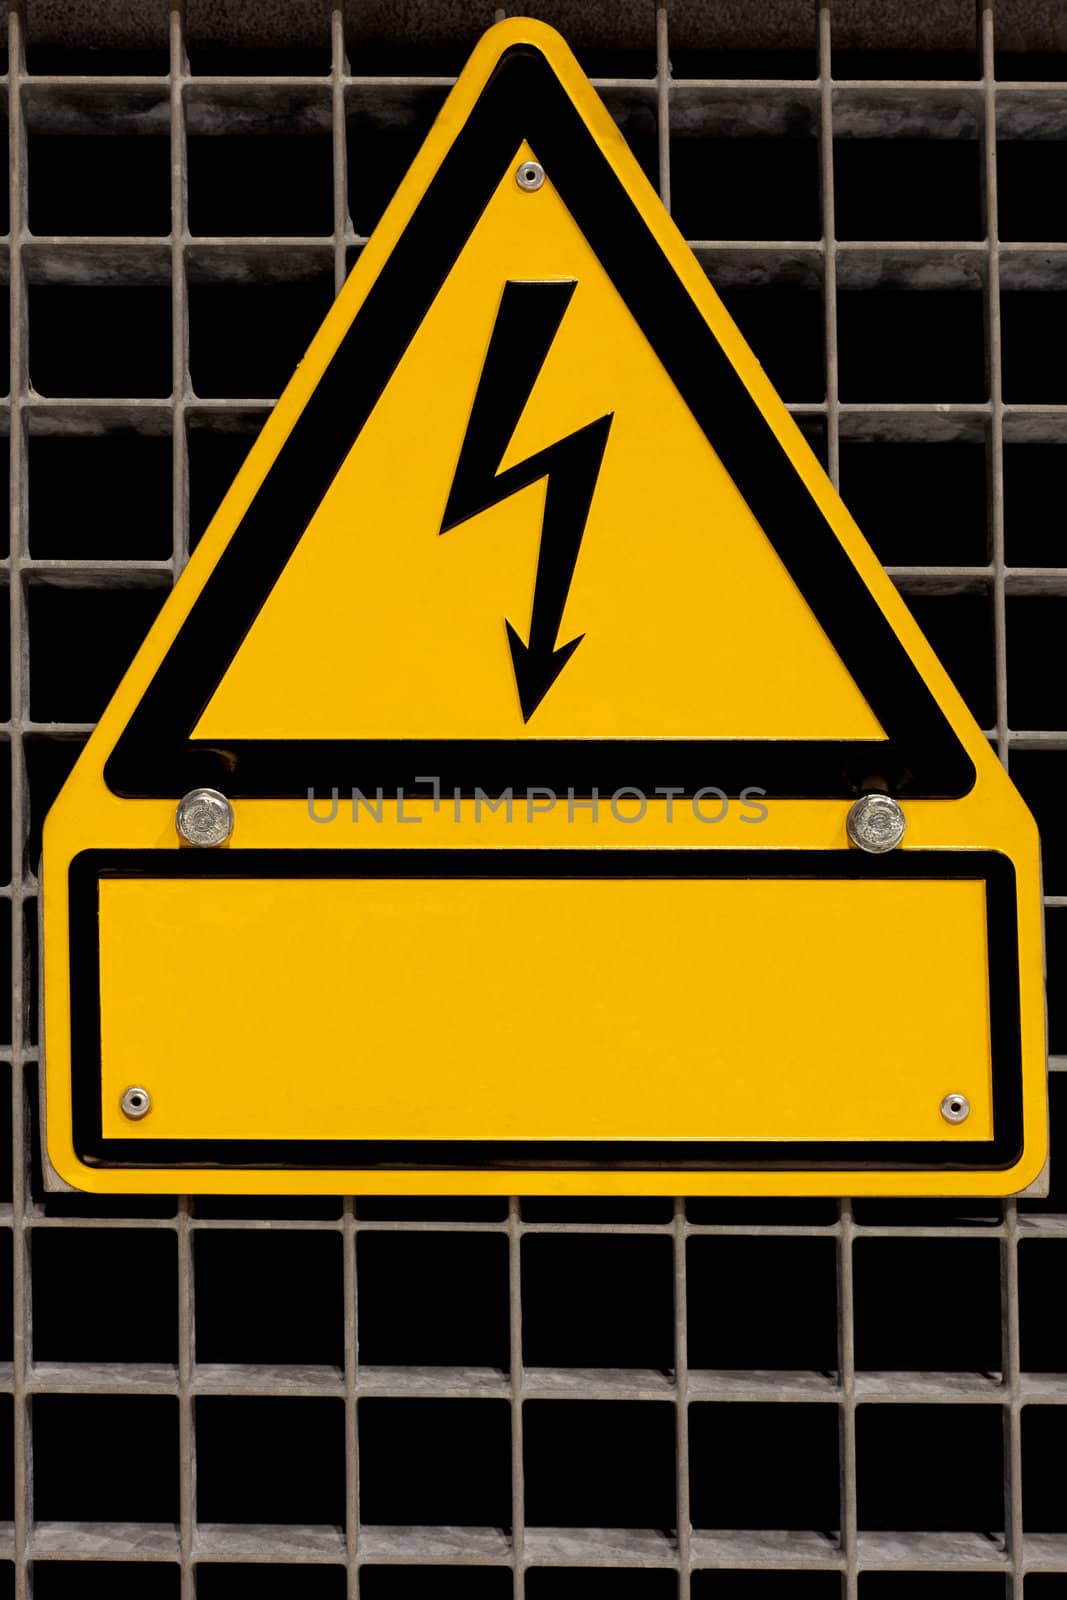 Metal high voltage danger sign bolted to steel grid with blank copyspace for your message.